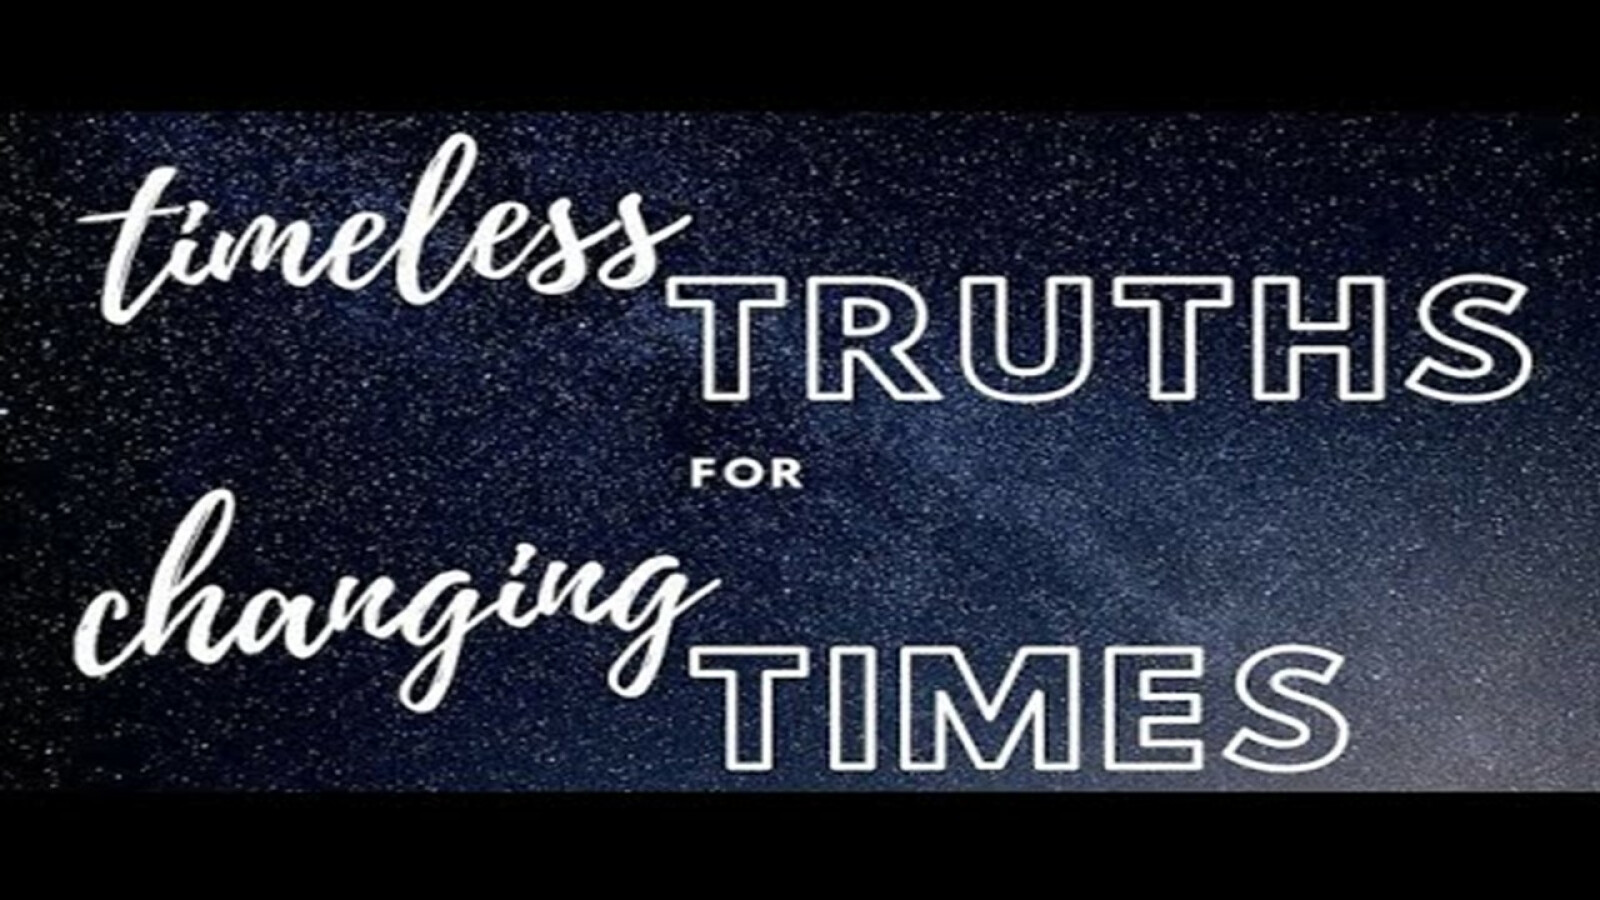 Timeless Truths for Changing Times